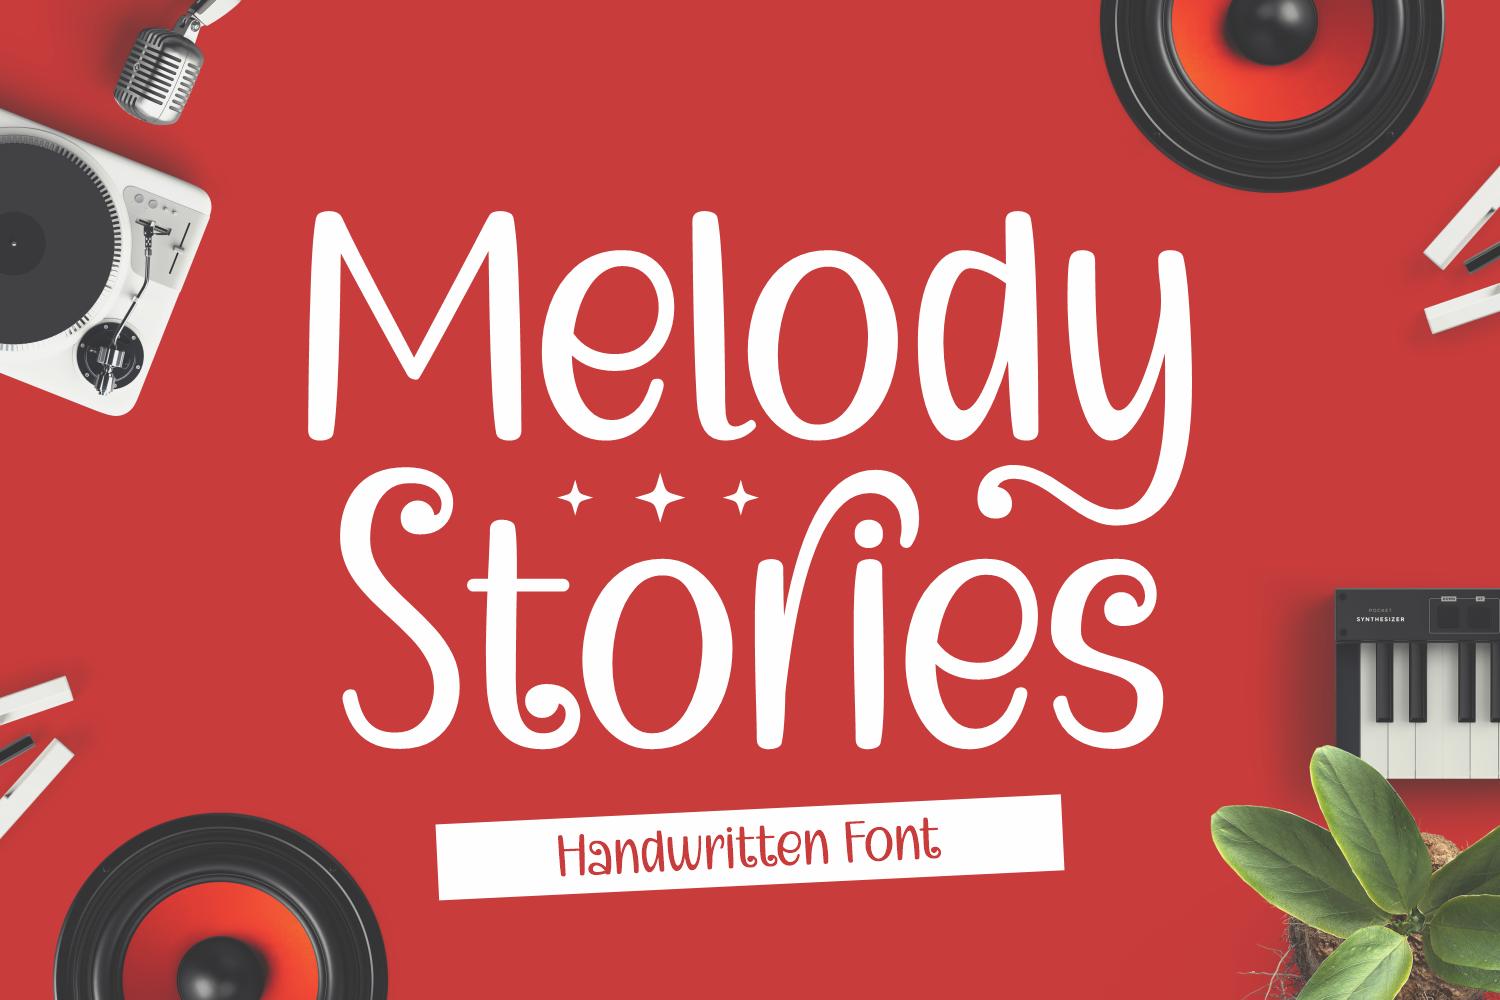 Melody Stories Font